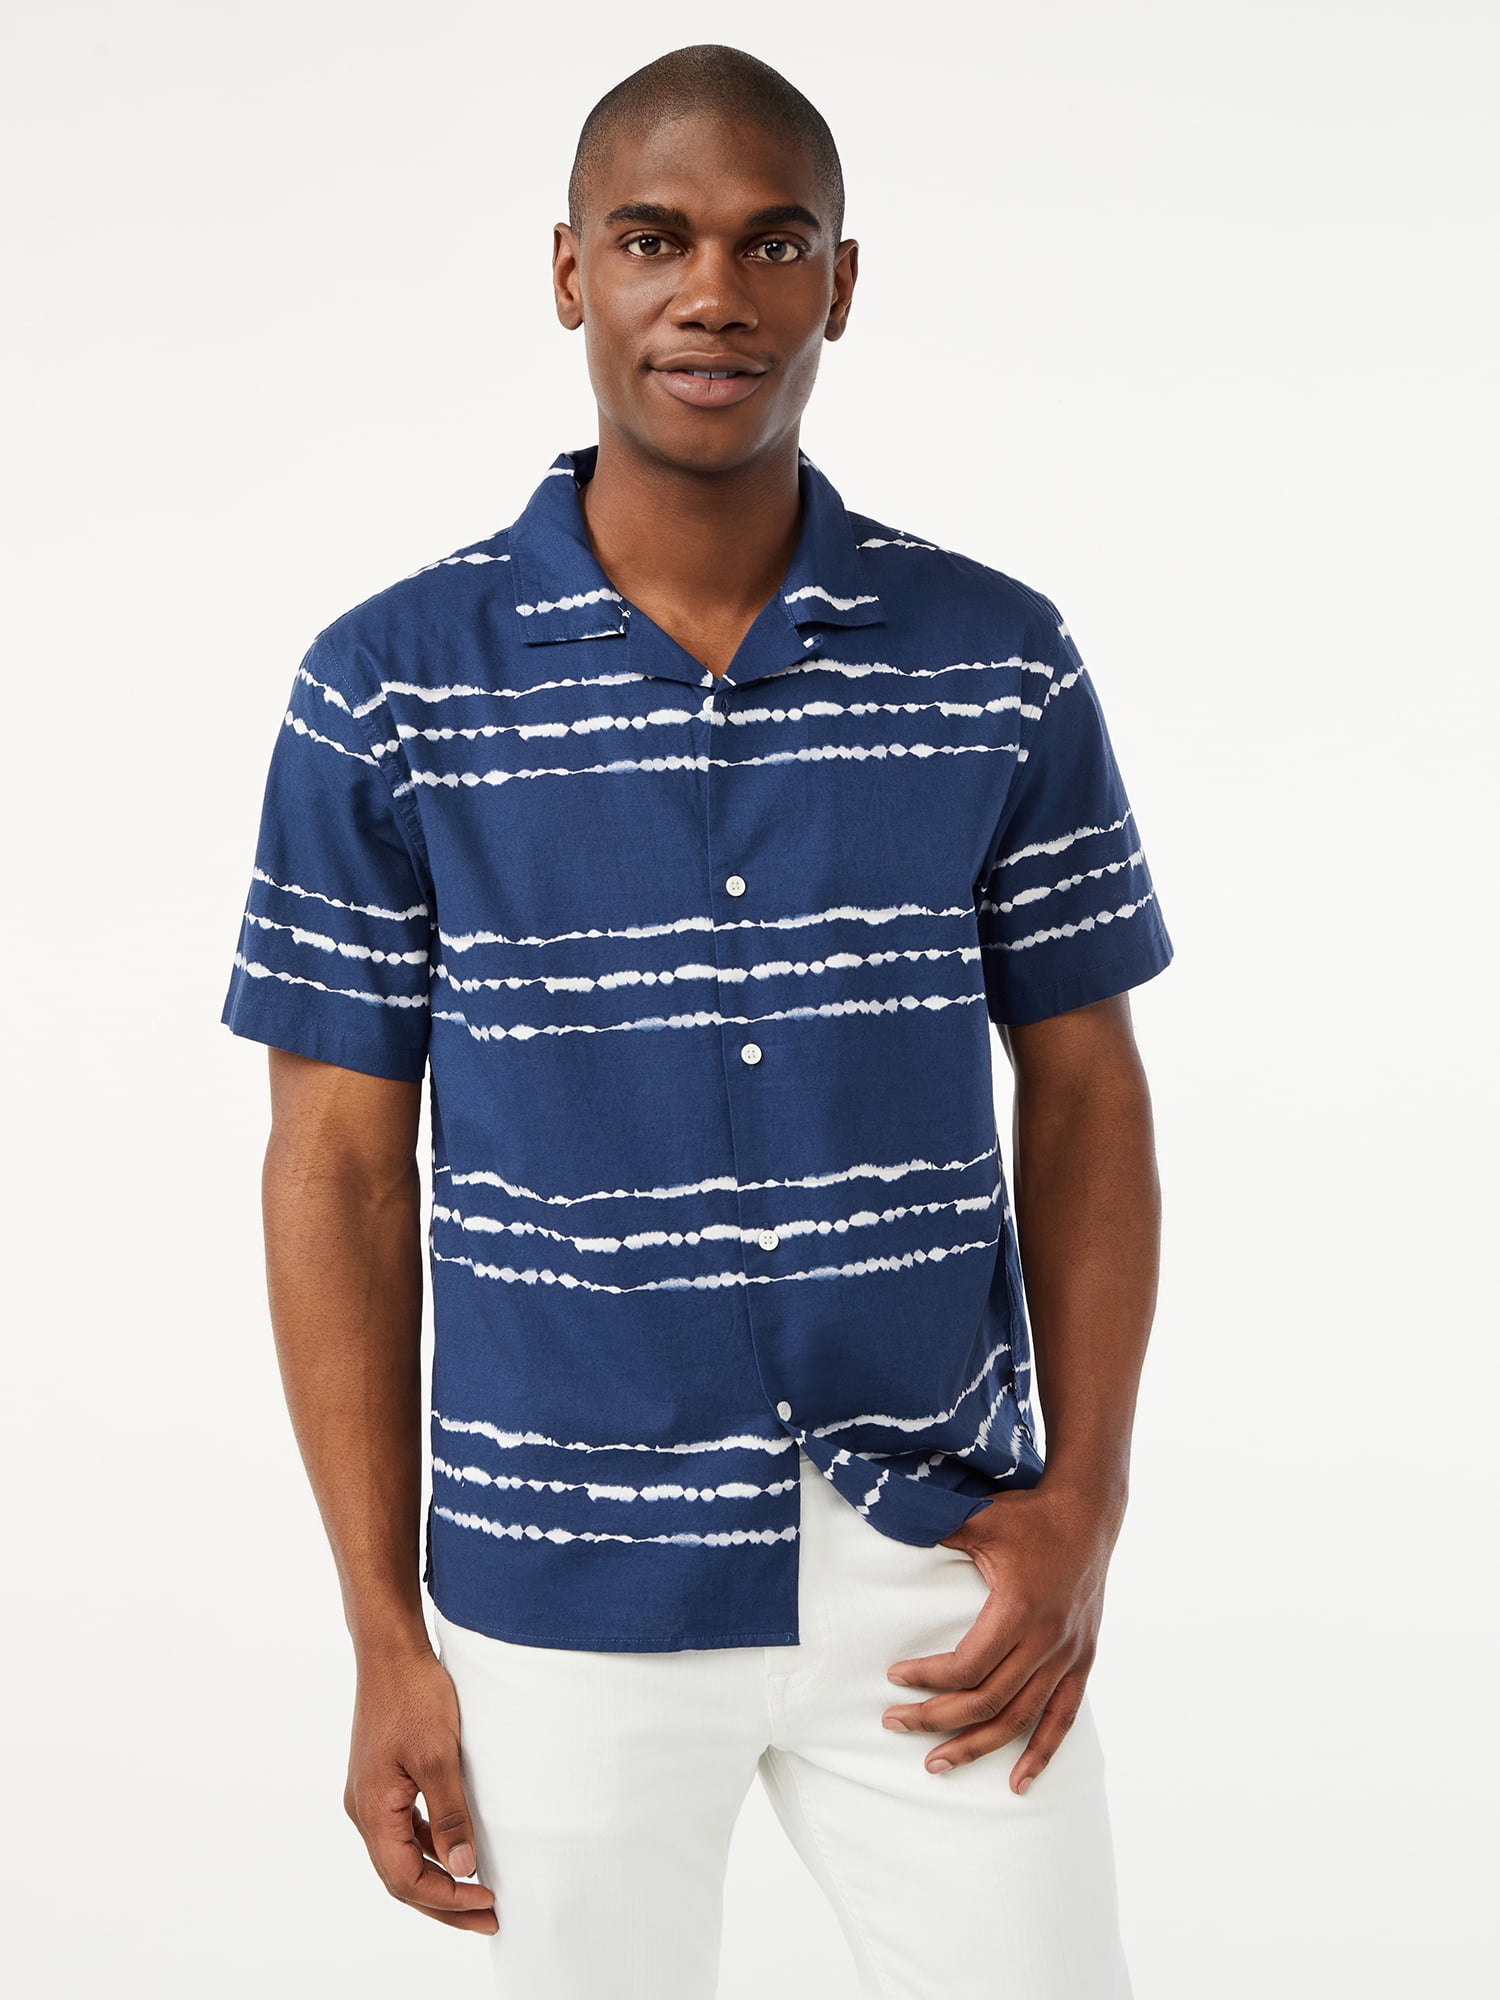 Free Assembly Men's Camp Shirt with Short Sleeves - Walmart.com